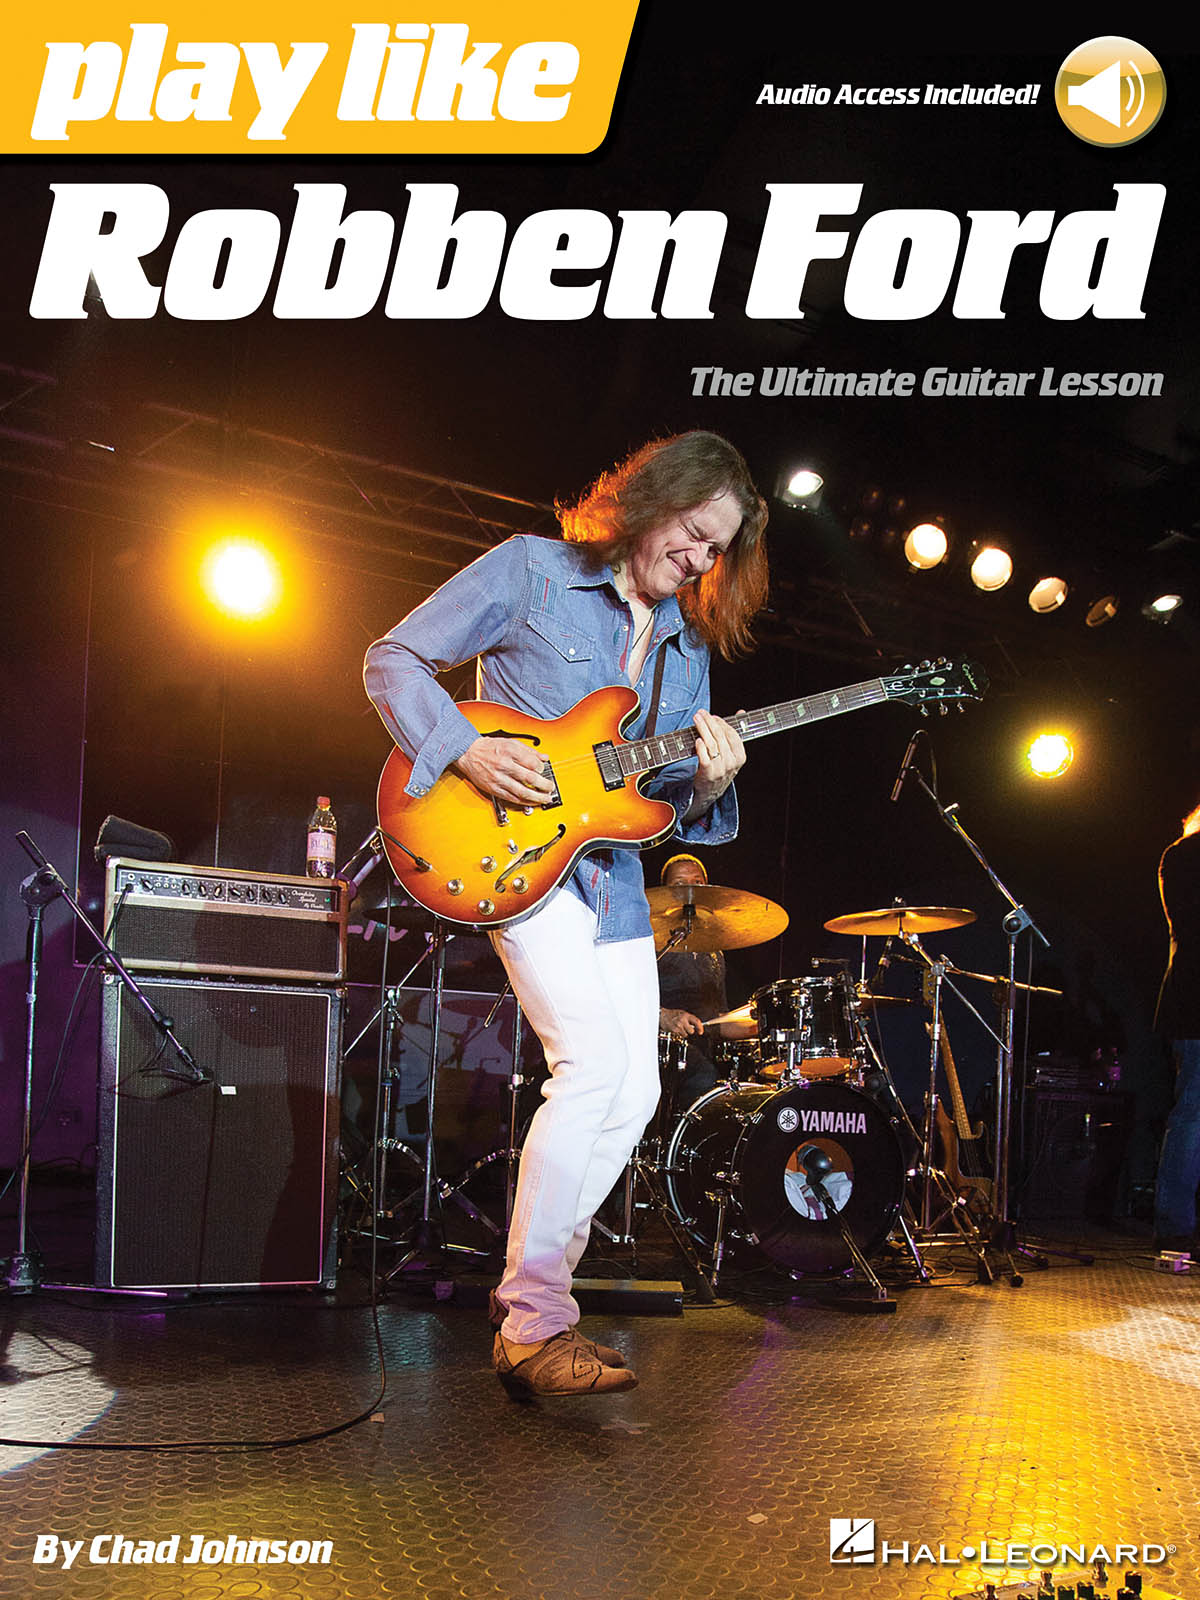 Play like Robben Ford - The Ultimate Guitar Lesson Book - noty na kytaru